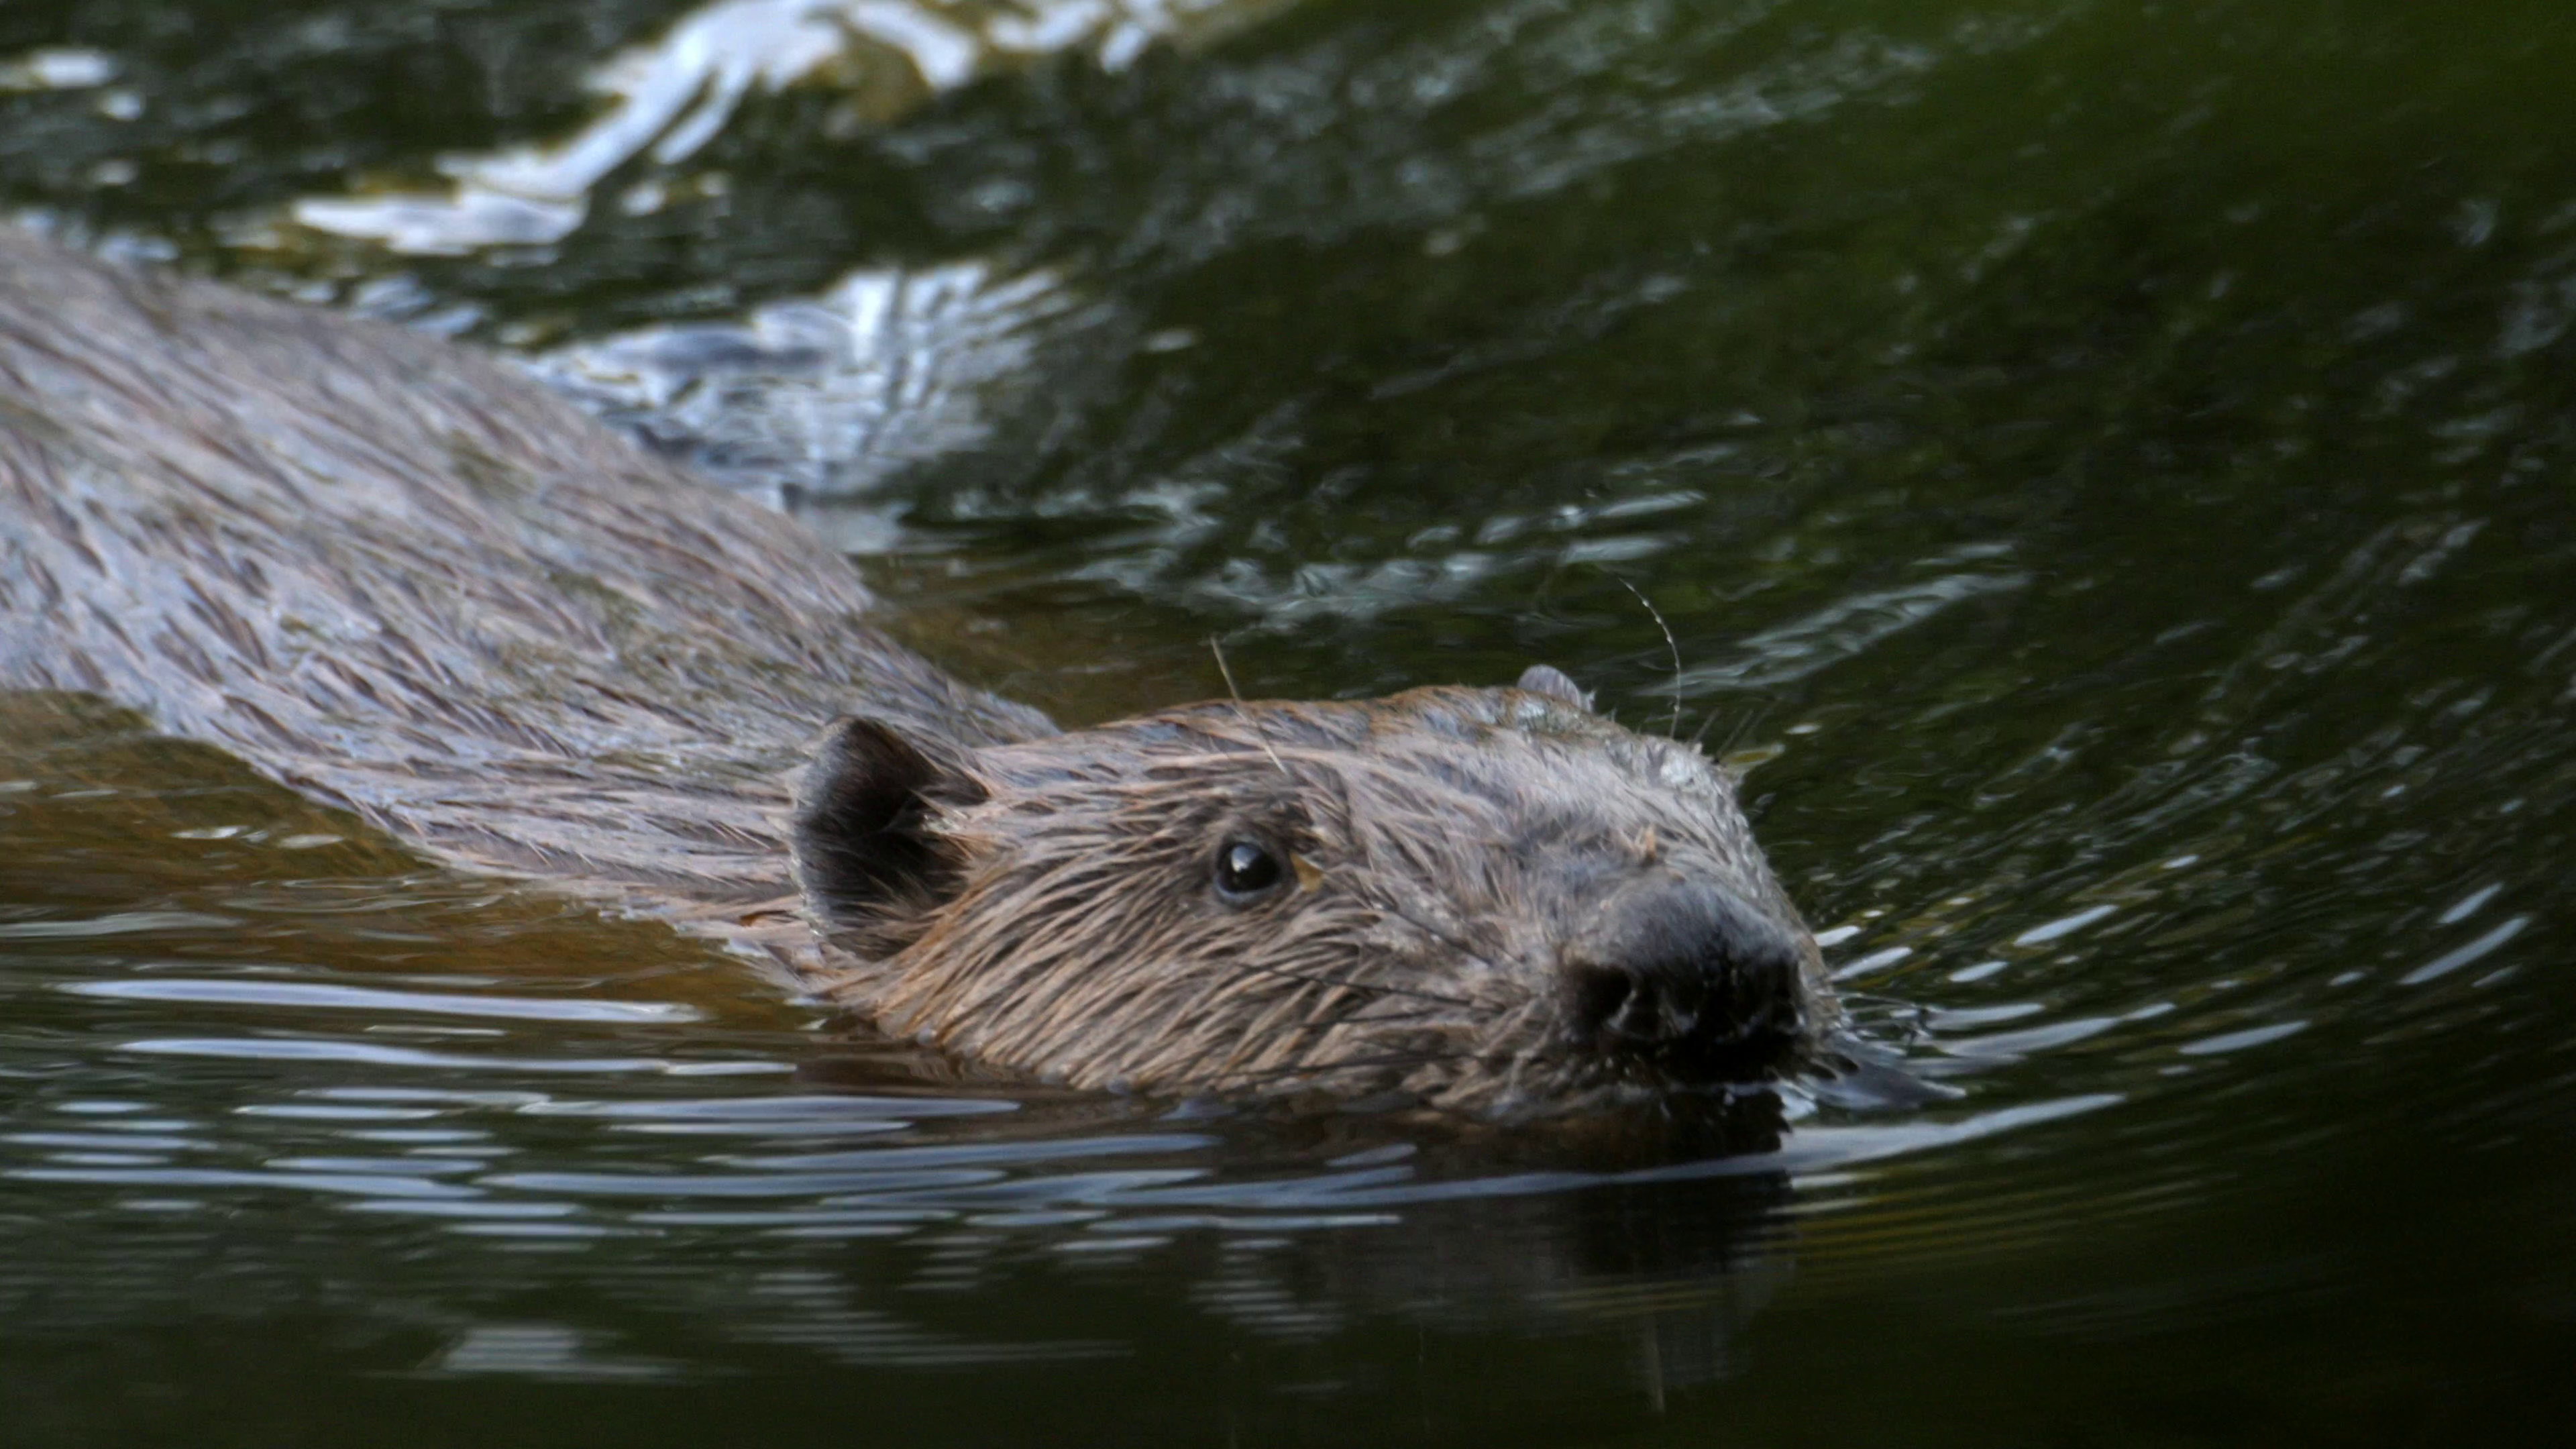 Working together to bring back beavers